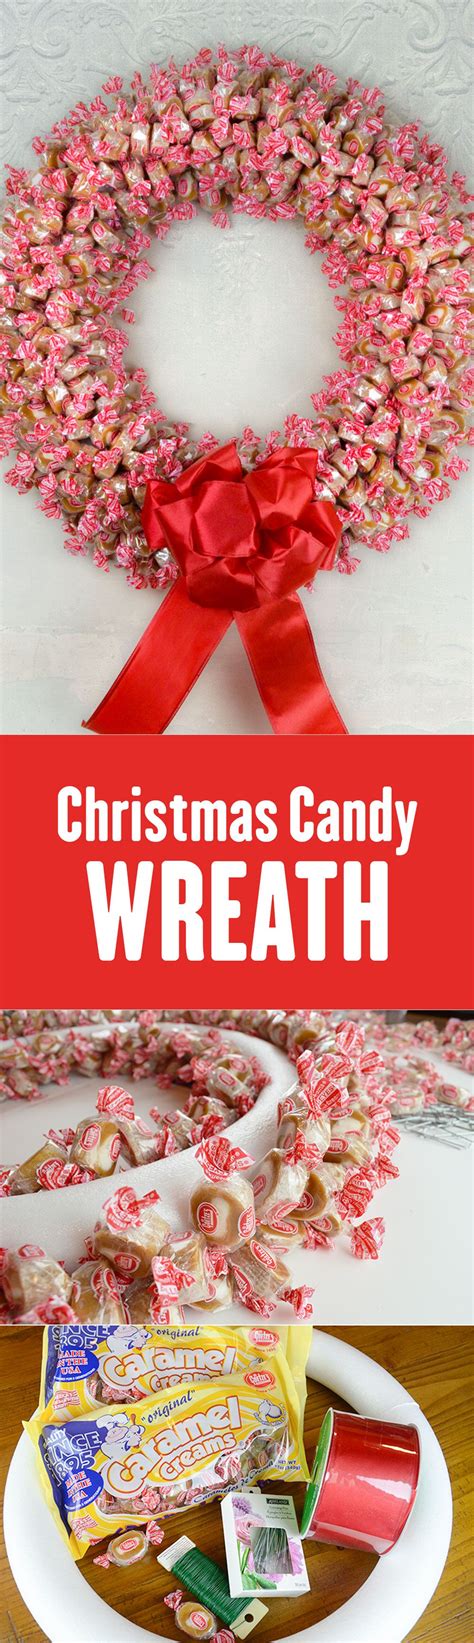 Christmas Candy Crafts Holiday Candy Holiday Wreaths Christmas Projects Holiday Crafts